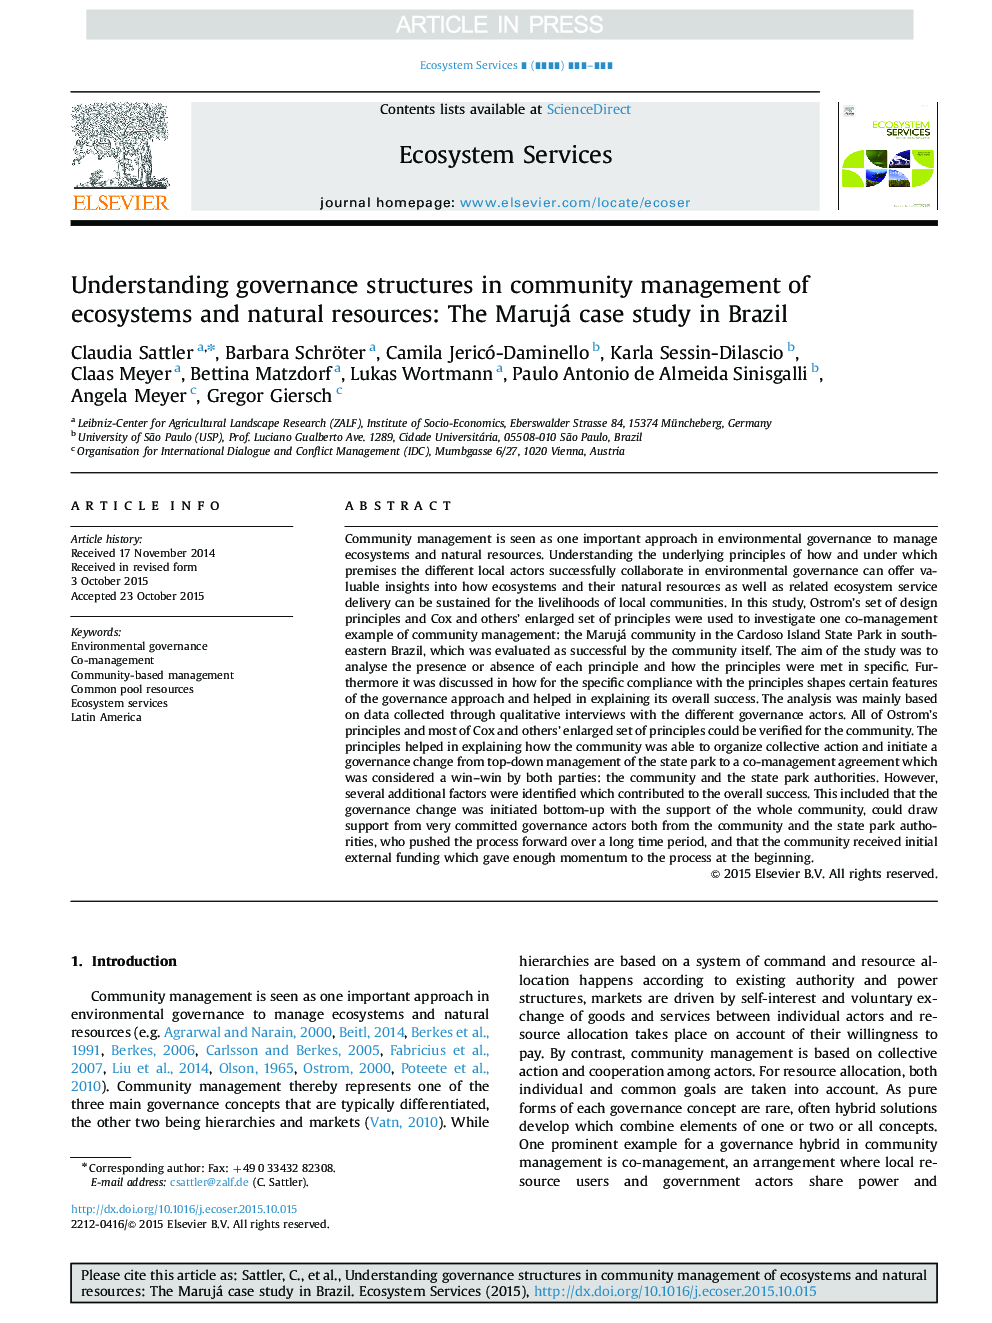 Understanding governance structures in community management of ecosystems and natural resources: The Marujá case study in Brazil